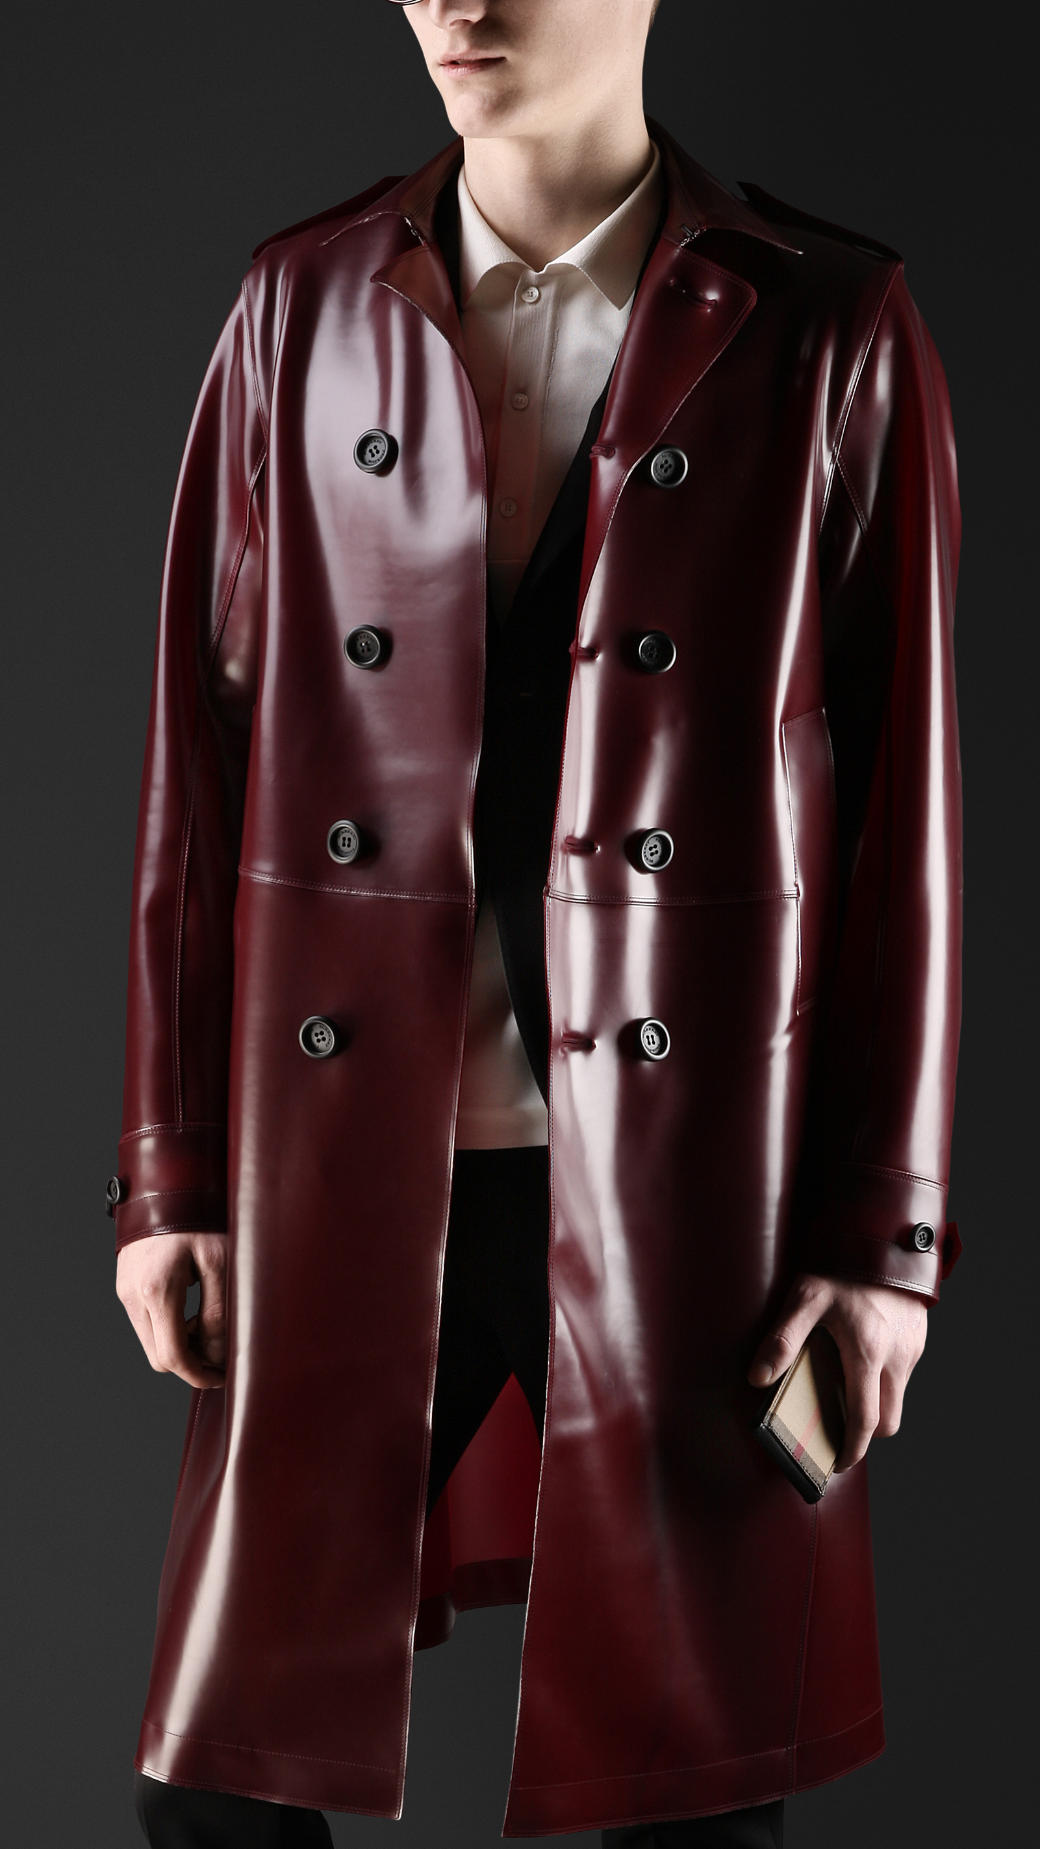 Burberry Prorsum Oxblood Translucent Rubber Trench Coat Product 1 10849148 315091152 